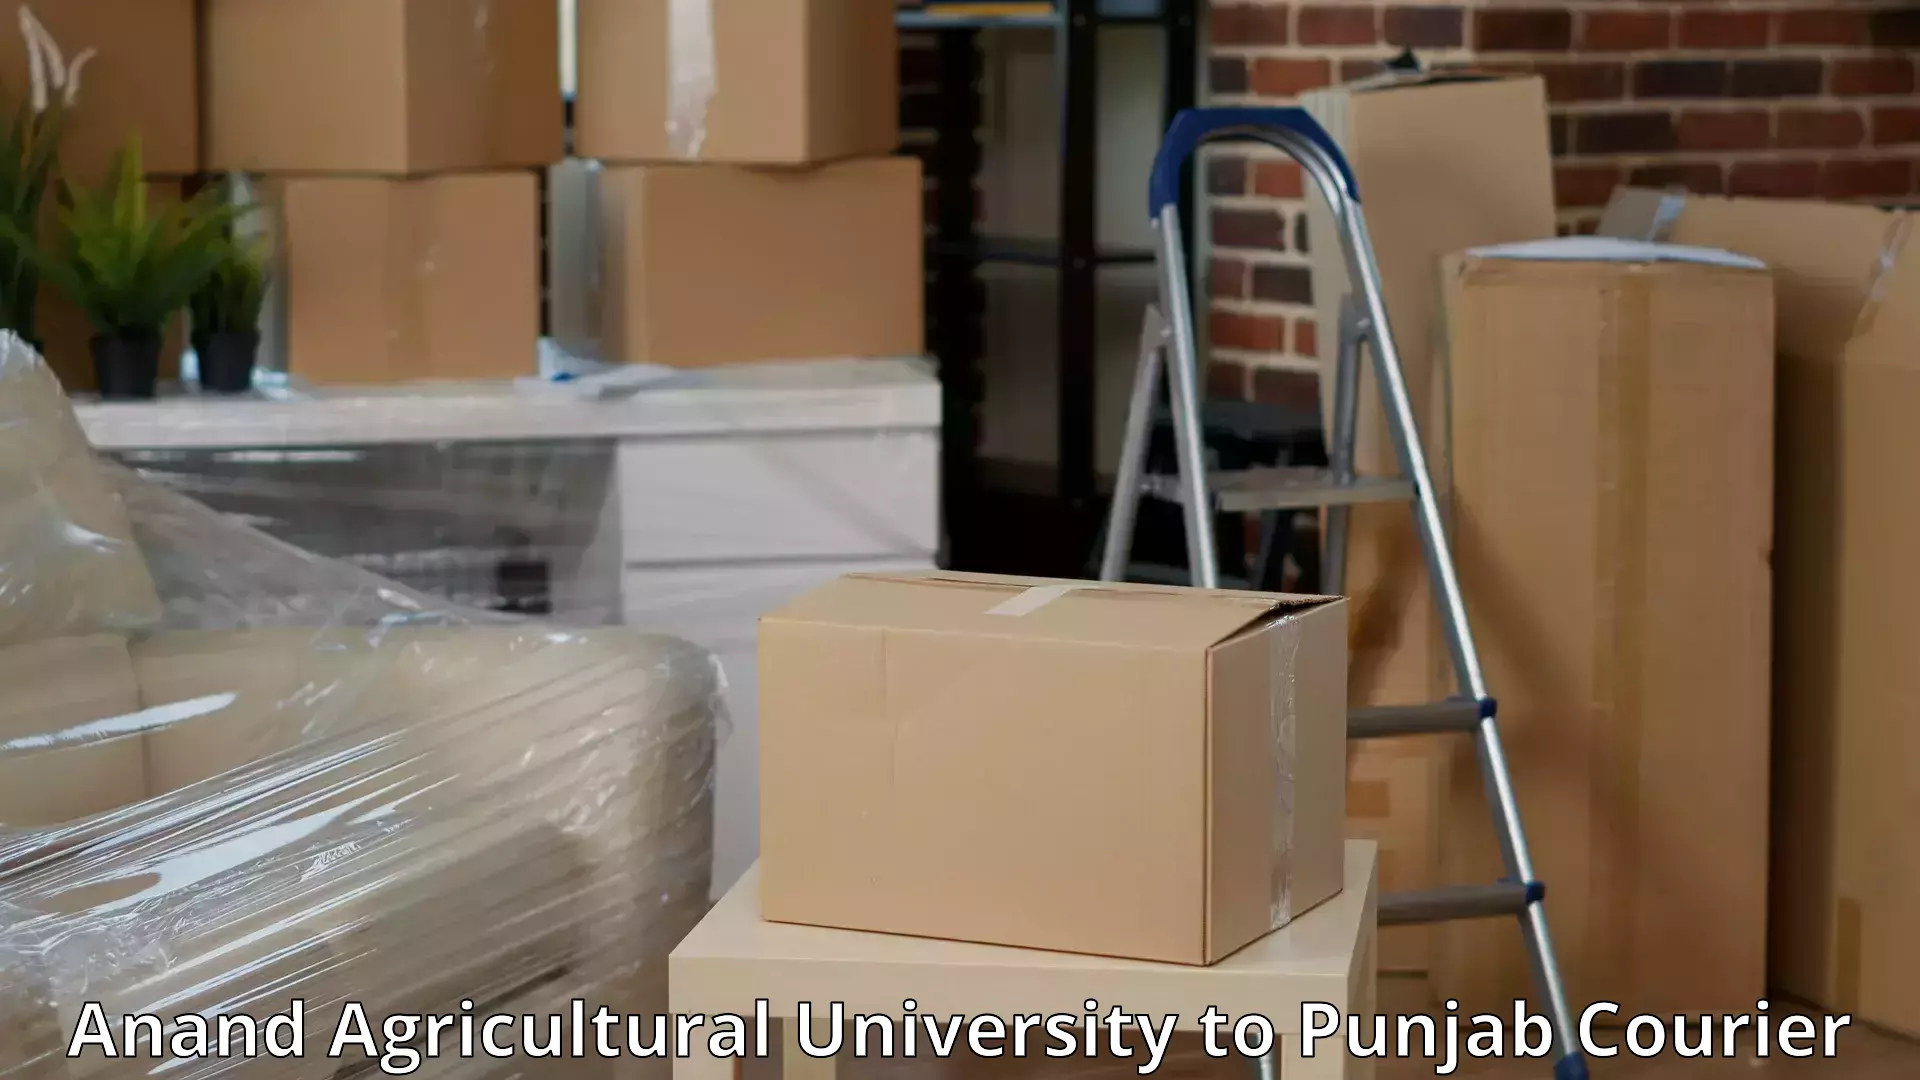 Furniture moving service Anand Agricultural University to Mansa